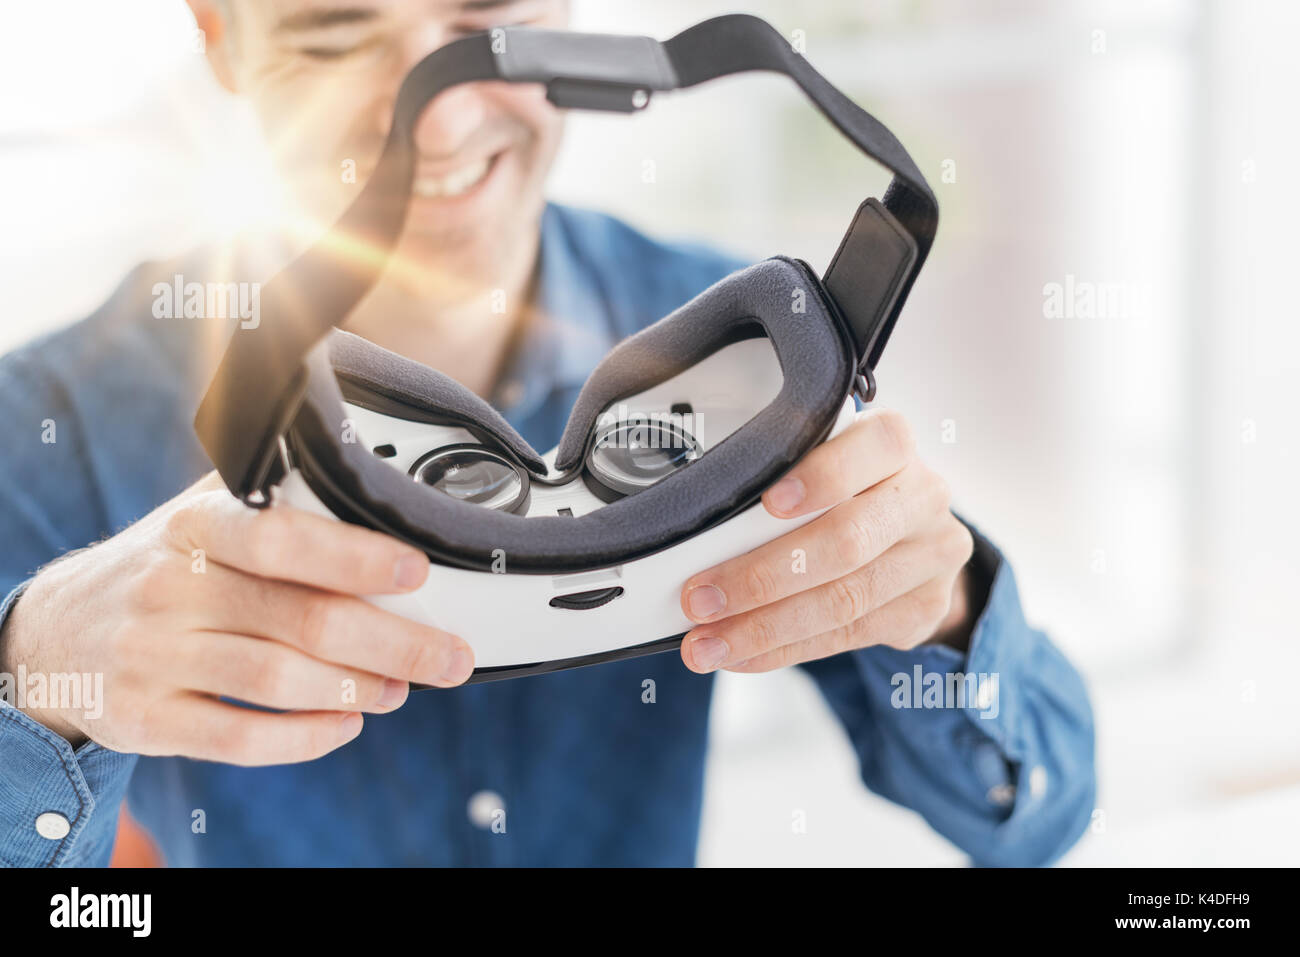 Man holding a virtual reality headset and smiling, innovative technology concept Stock Photo